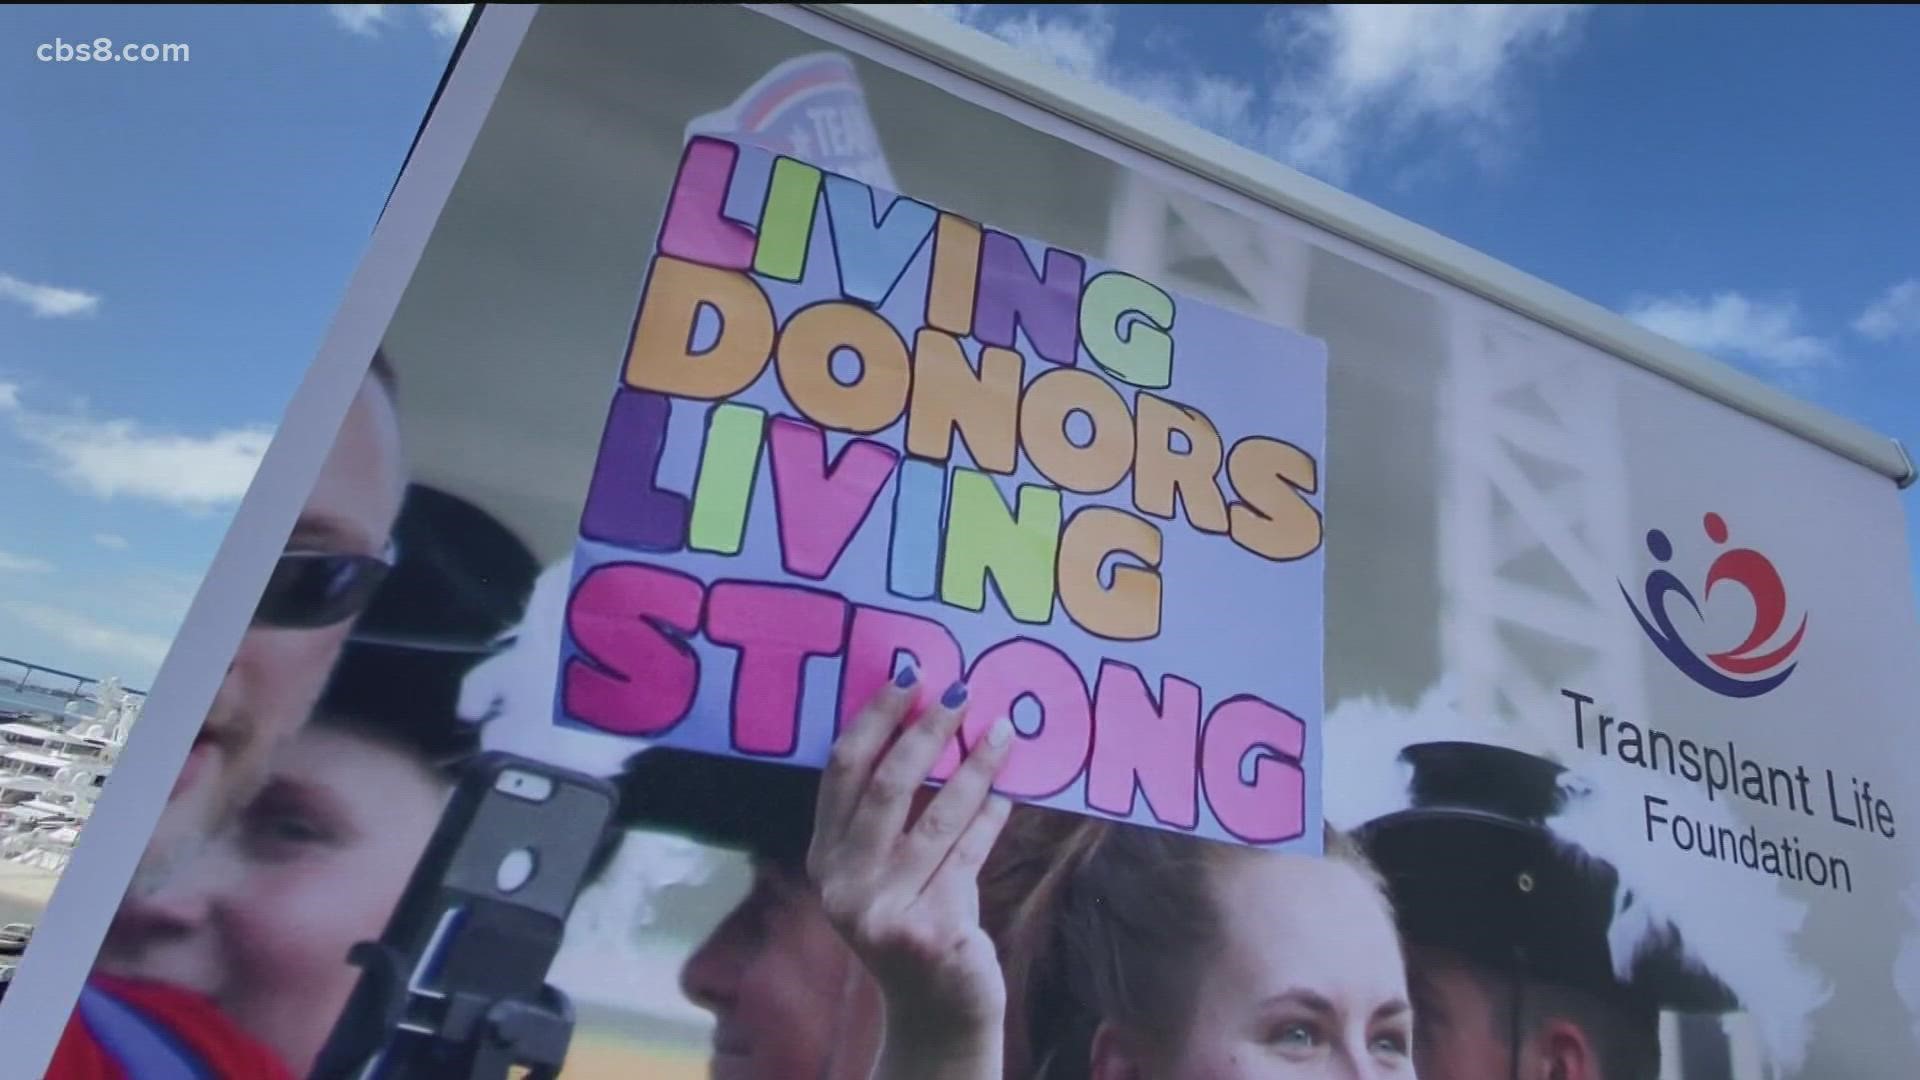 It's billed as the world's largest celebration of life and it's bringing a lot more than excitement to America's Finest City with 10,000 transplant recipients.